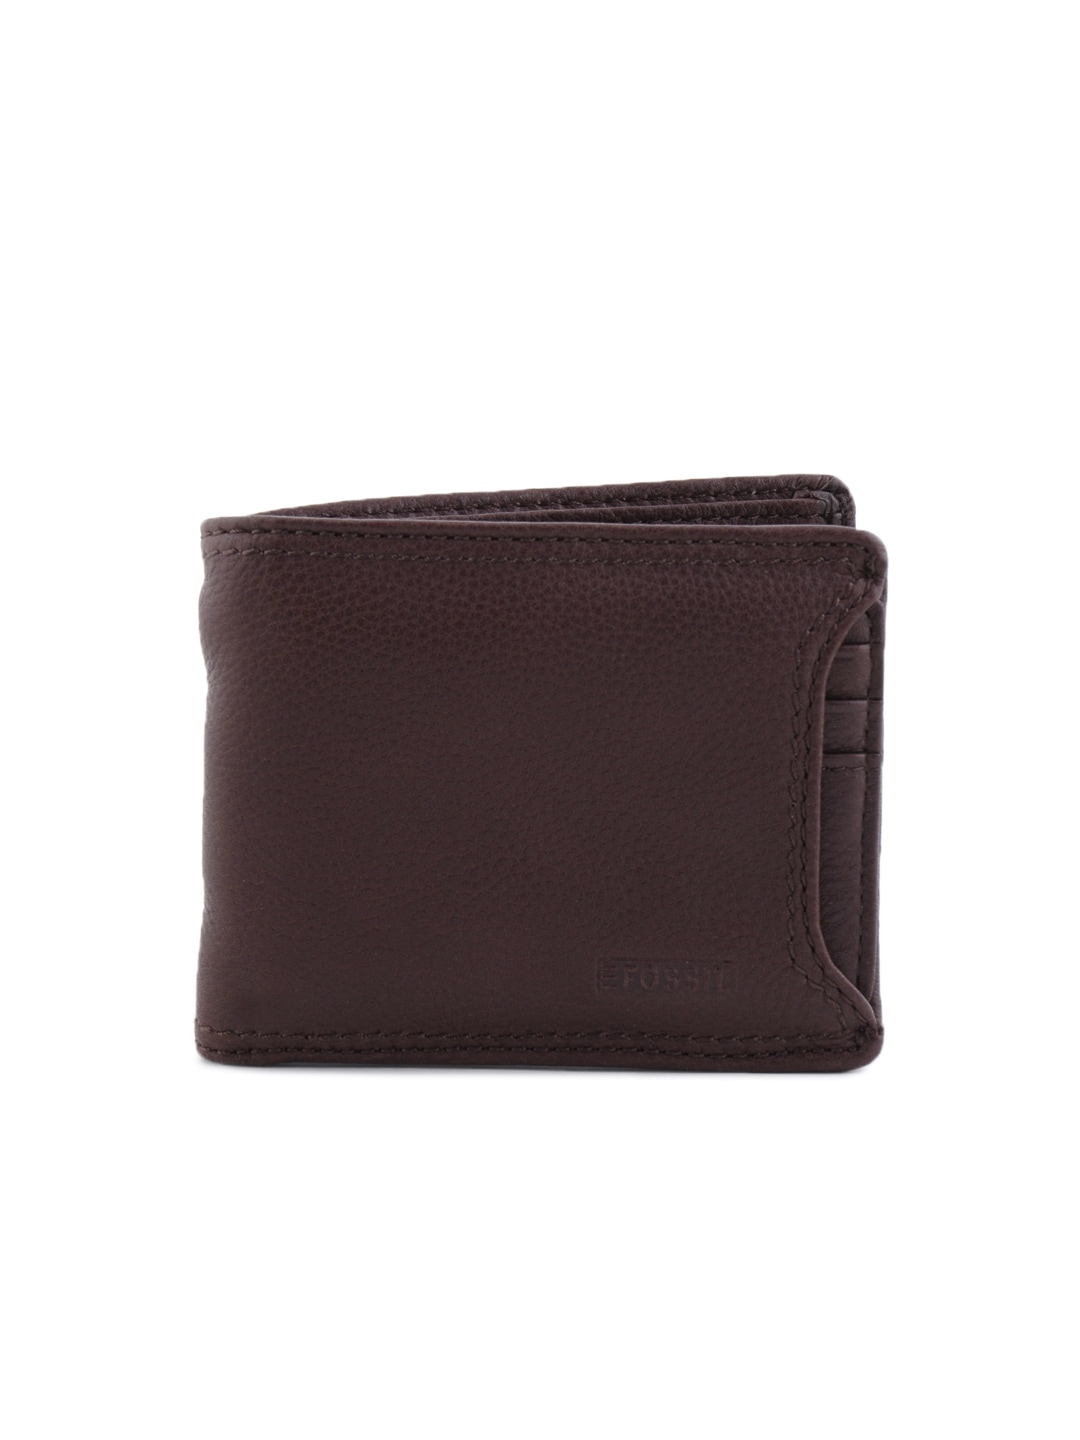 Fossil Men Midway 2 in 1 Brown Wallet